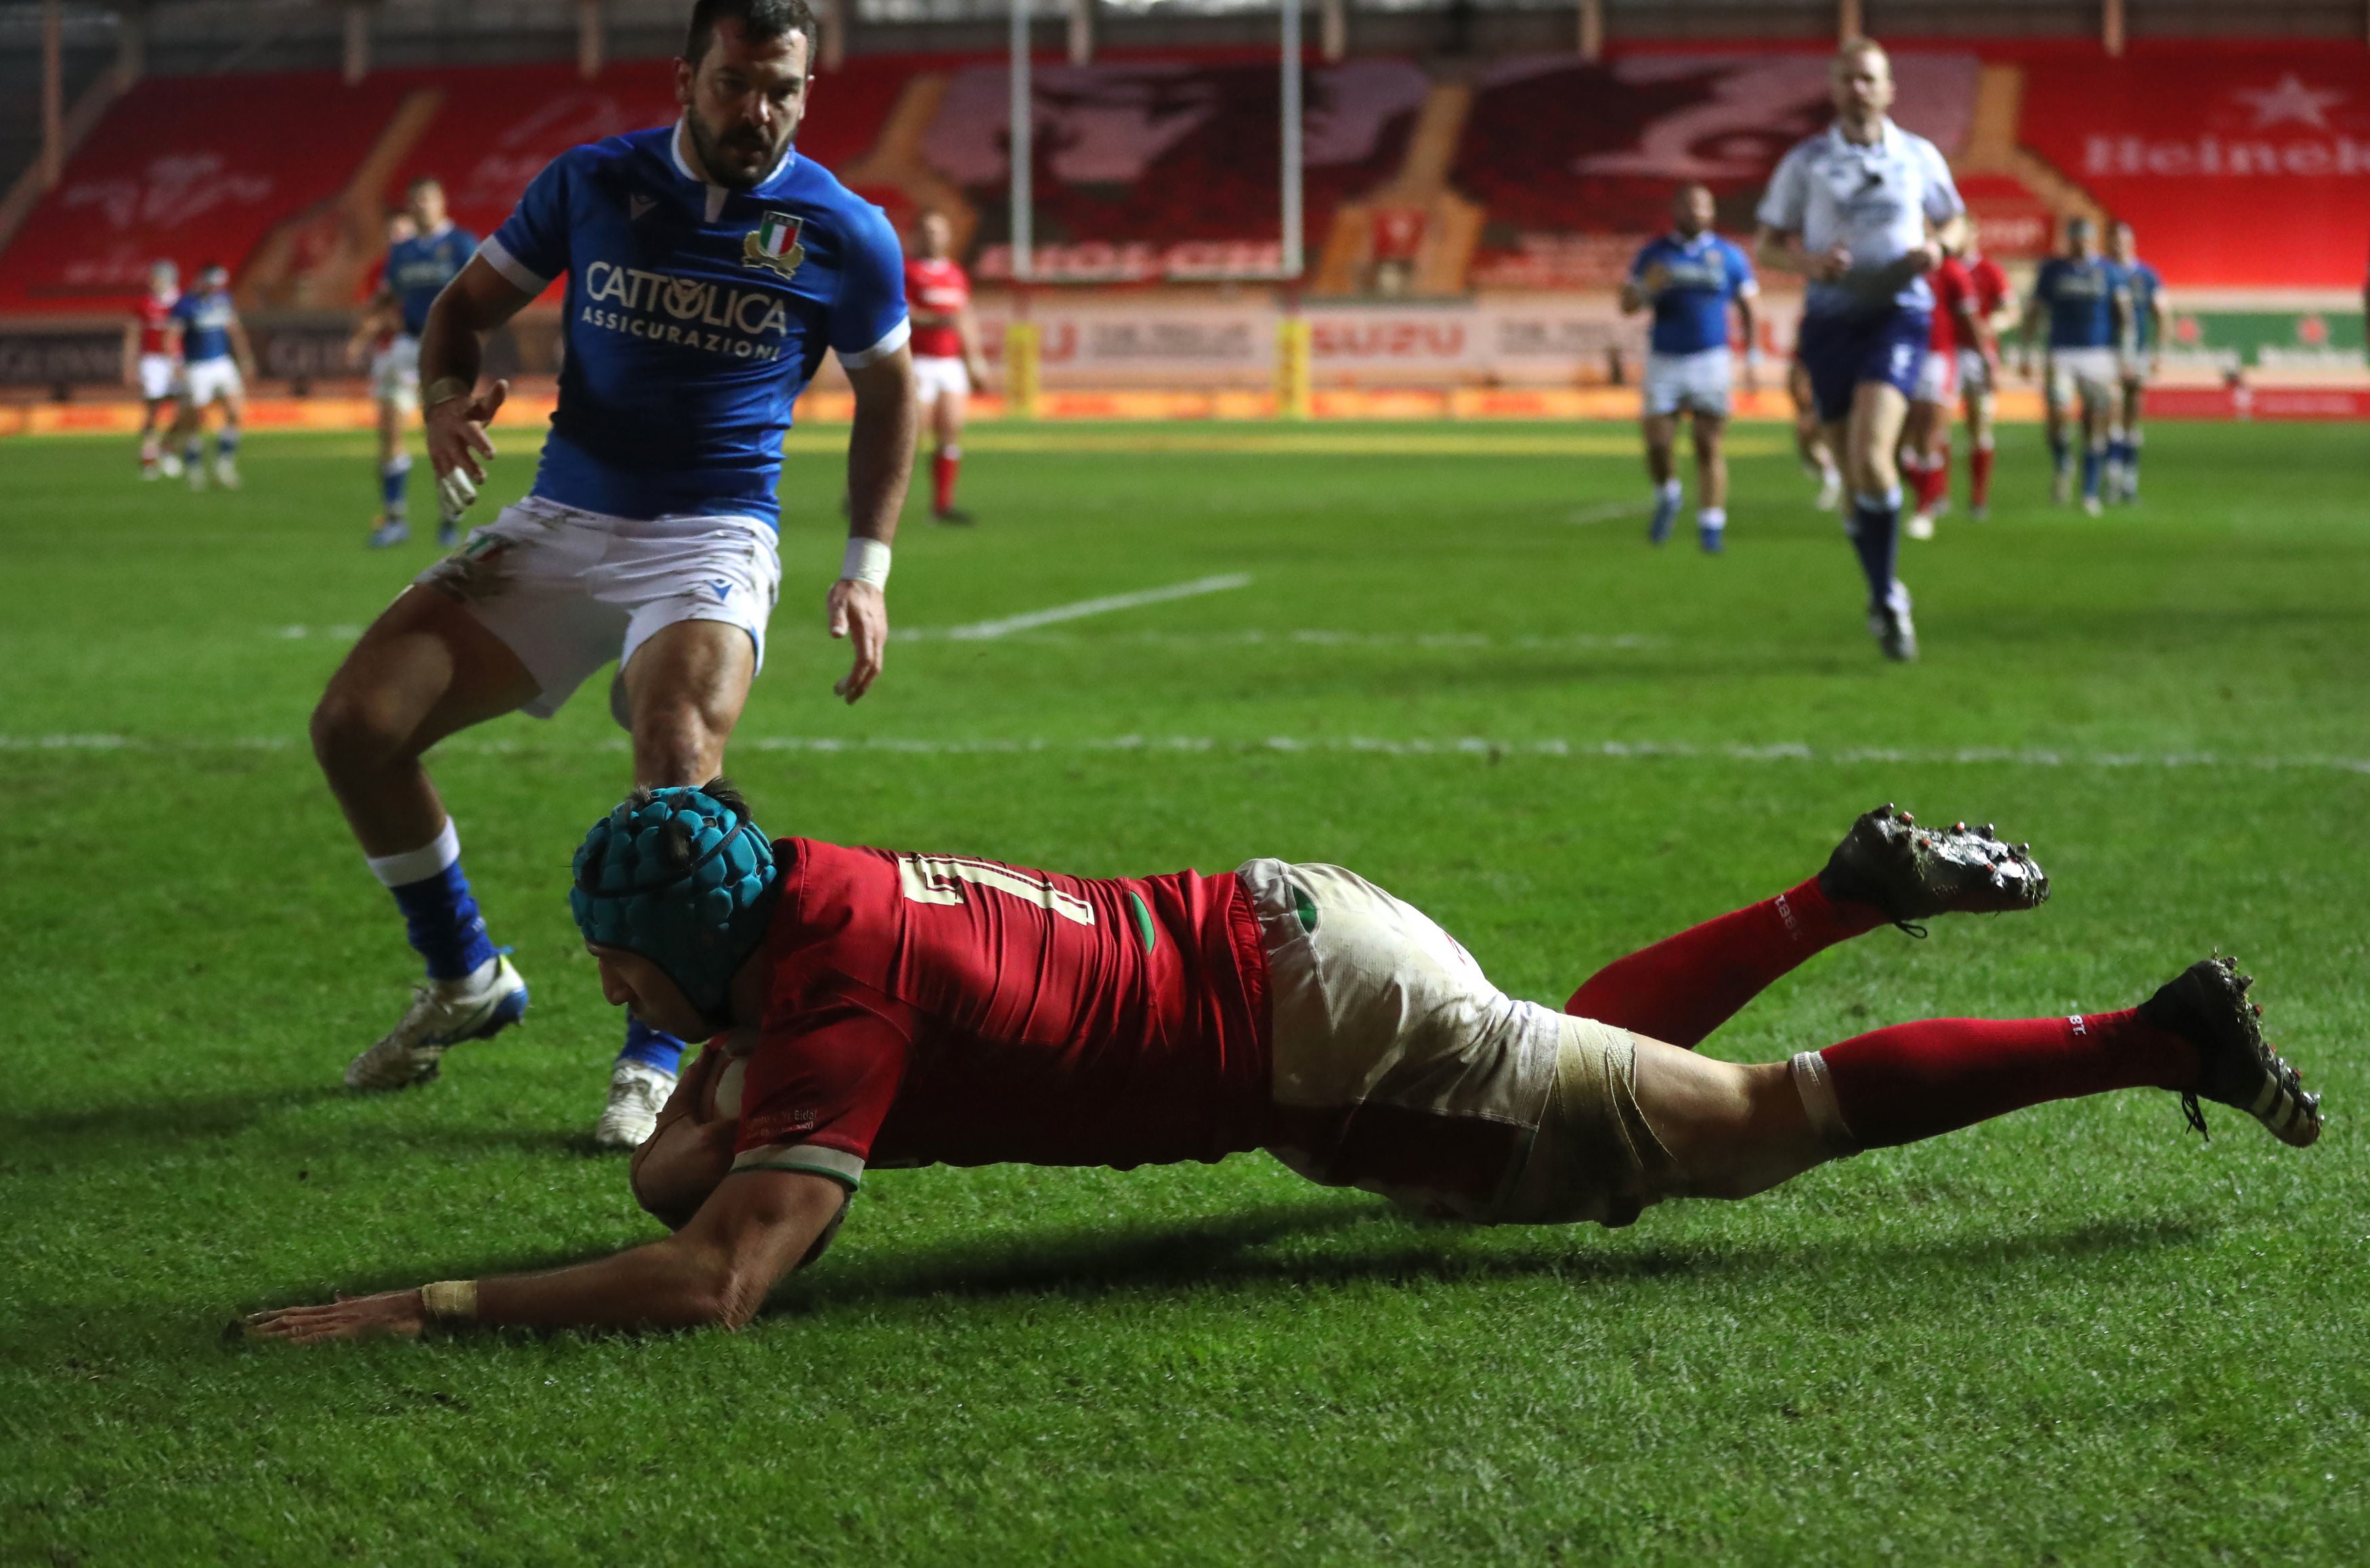 Justin Tipuric scores Wales’s fifth and final try to seal victory over Italy